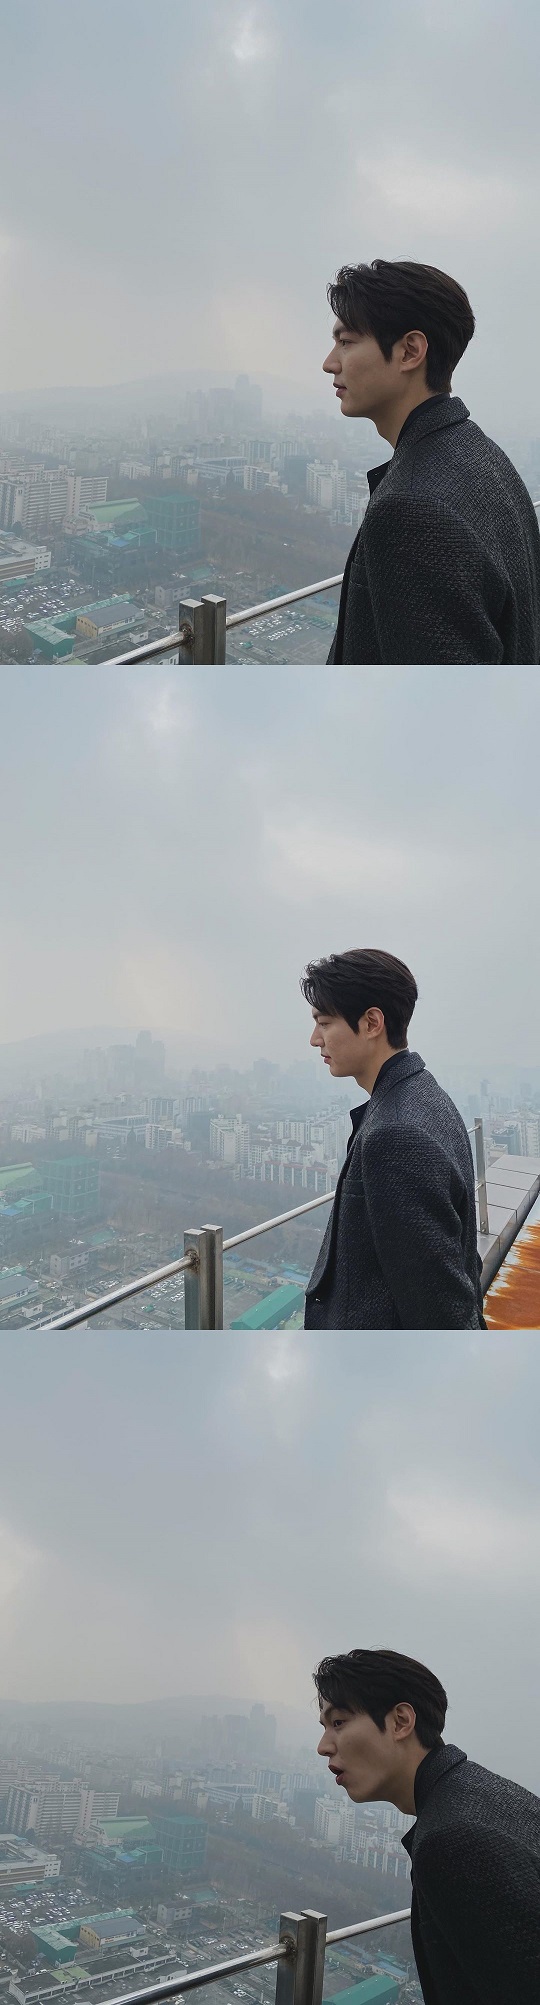 Lee Min-ho flaunted his perfect sideline.Actor Lee Min-ho posted three photos on his Instagram on the 10th.The photo shows Lee Min-ho looking down from the rooftop of the building. The sleek jawline, nose, and warm visuals caught the attention of netizens.Meanwhile, Lee Min-ho will appear on SBS Drama The King: The Monarch of Eternity, which is scheduled to air in 2020.Photo: Lee Min-ho Instagram